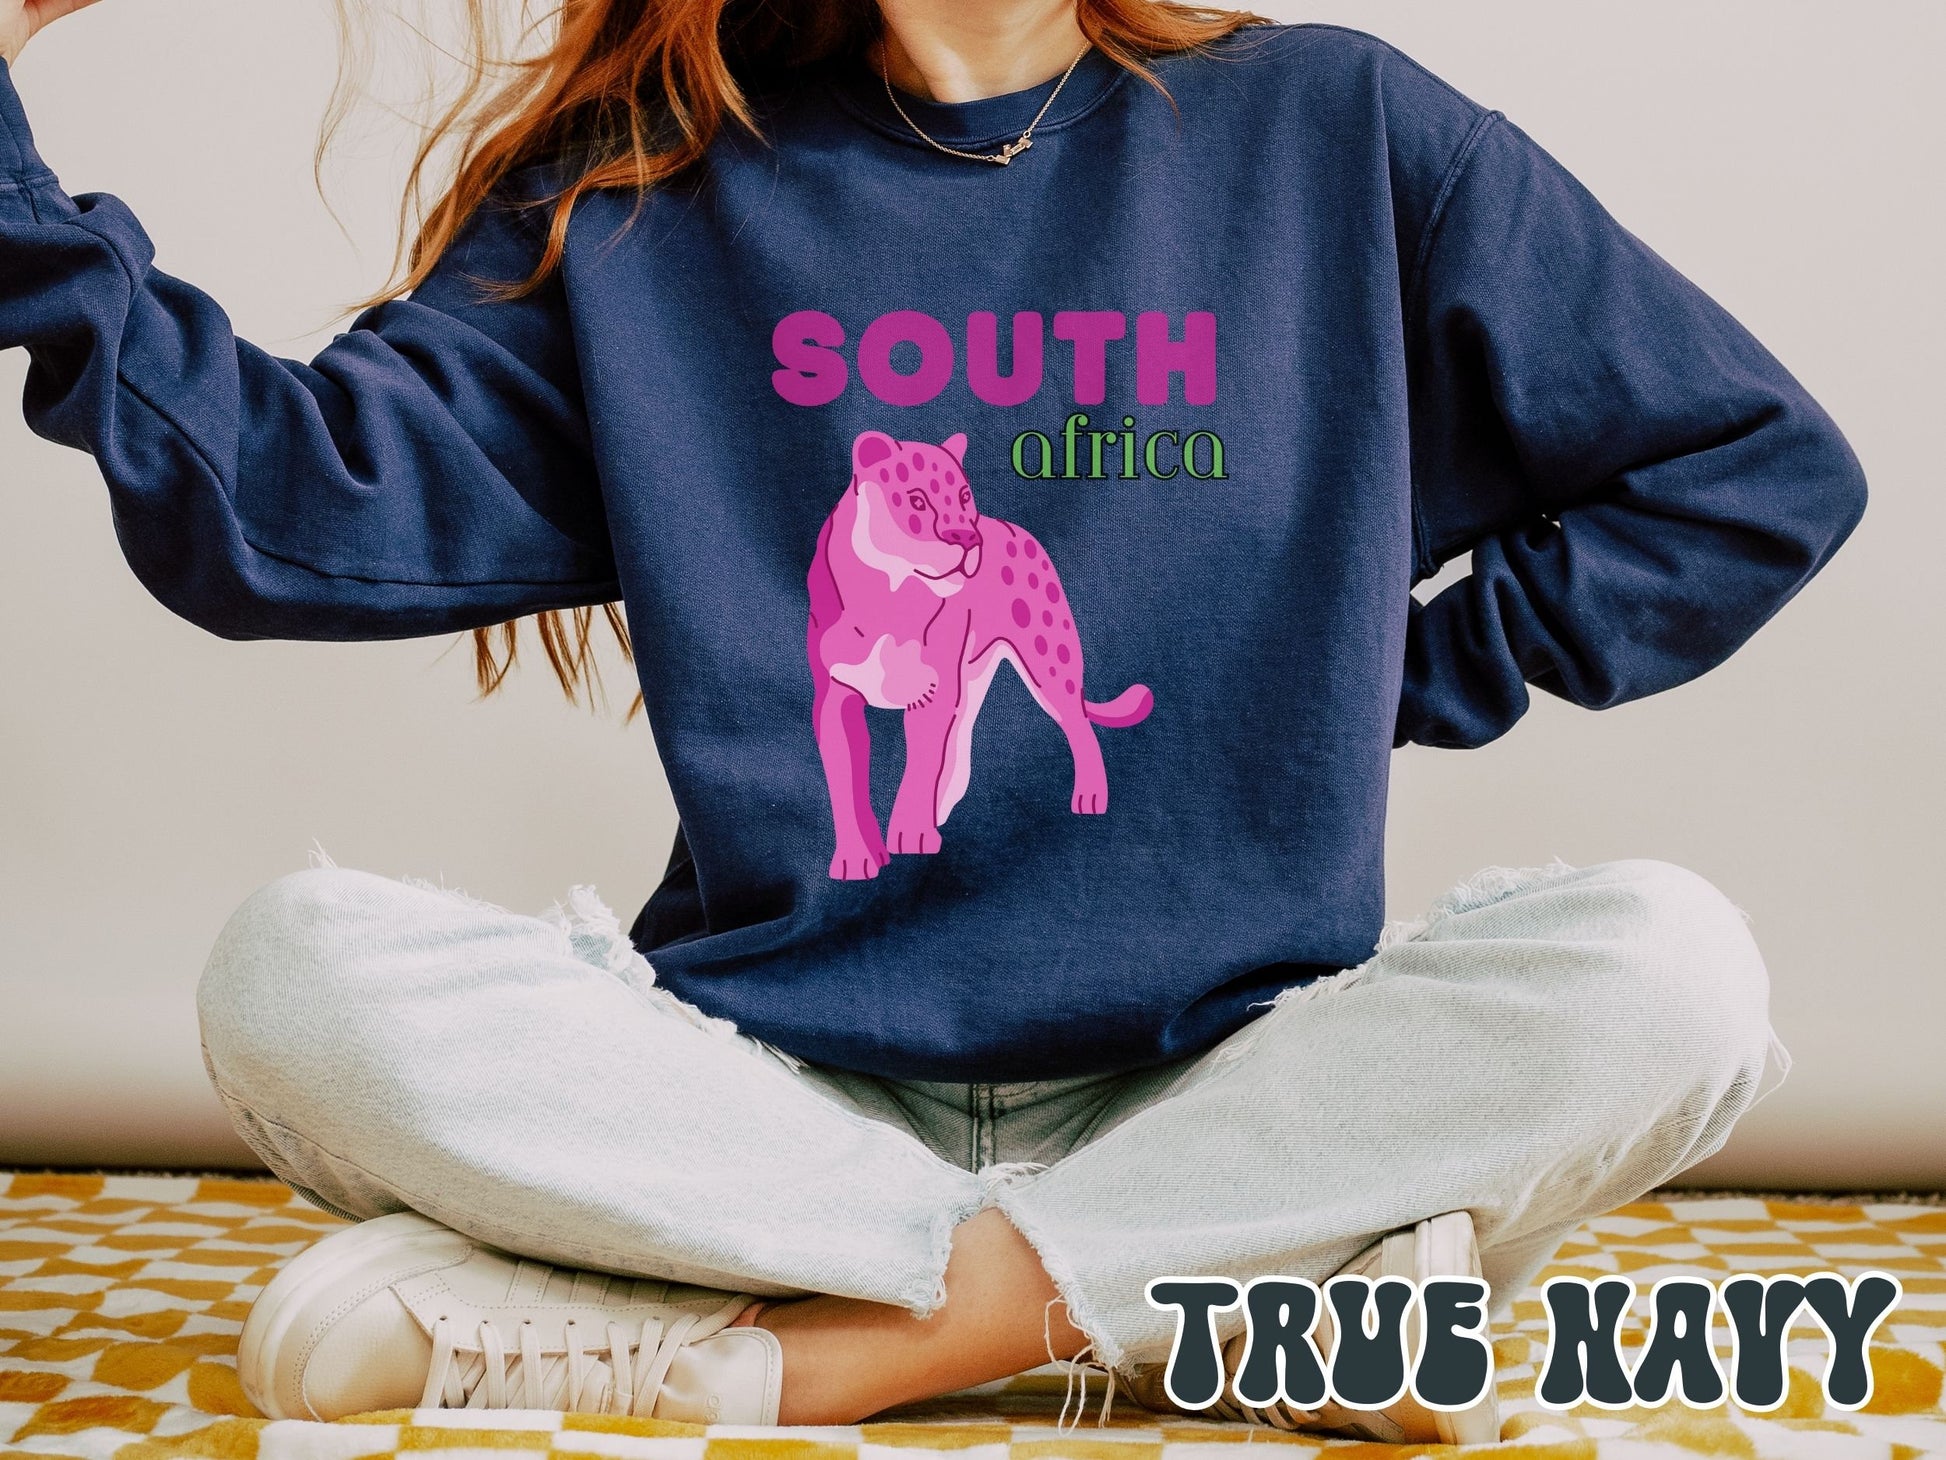 A woman wearing a vintage, true navy colored sweatshirt with the text South Africa in pink and green font, respectively, and a pink tiger underneath on the prowl.